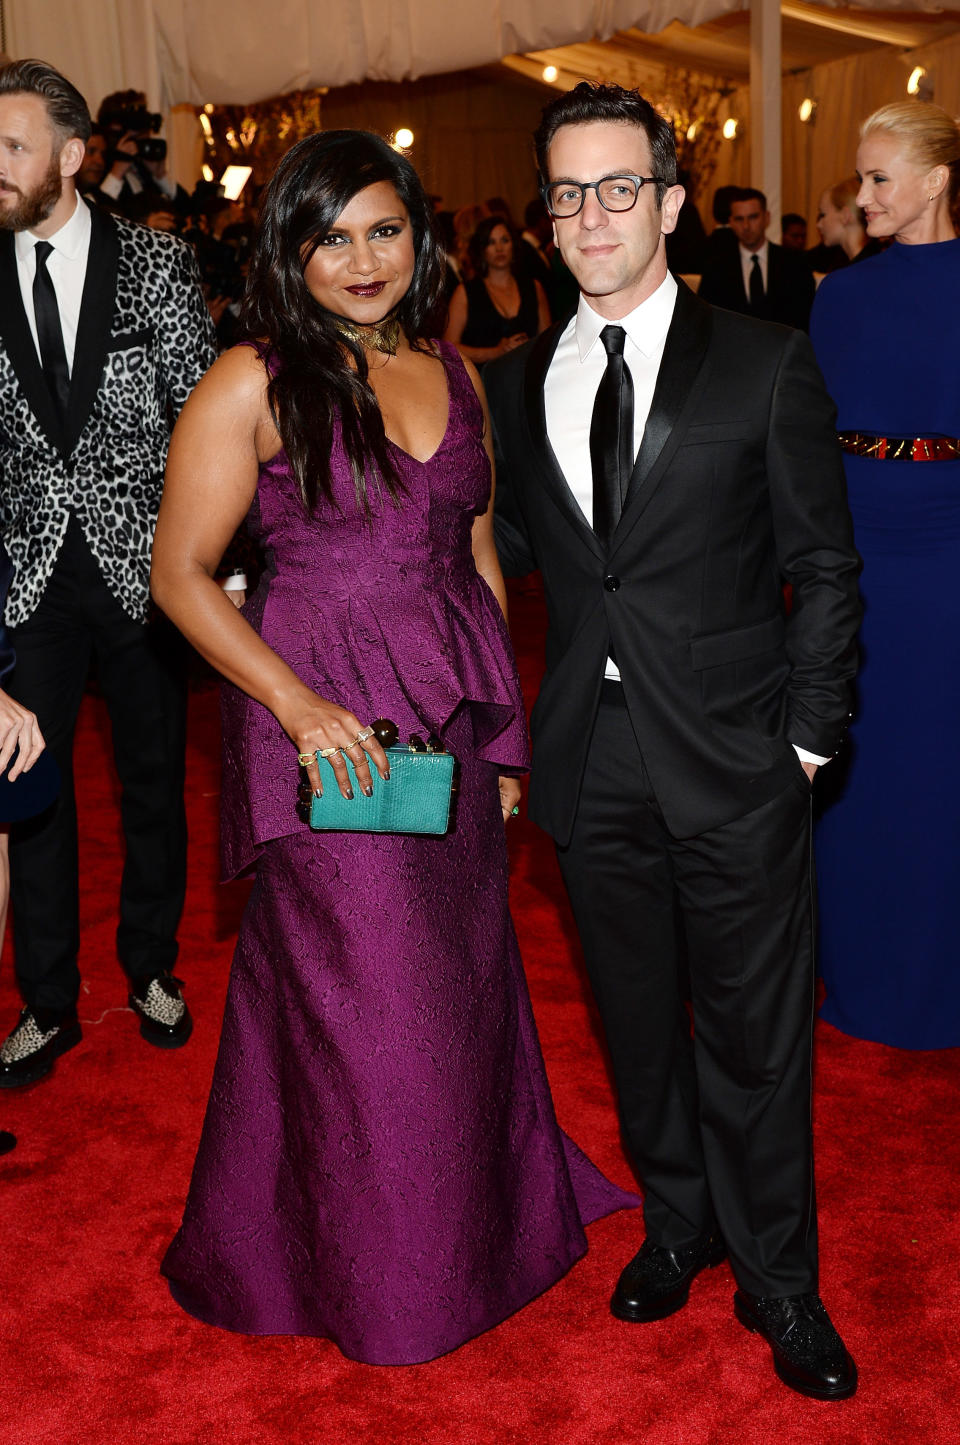 Mindy Kaling and B.J. Novak attend the Costume Institute Gala for the 'PUNK: Chaos to Couture' exhibition at the Metropolitan Museum of Art on May 6, 2013 in New York City.